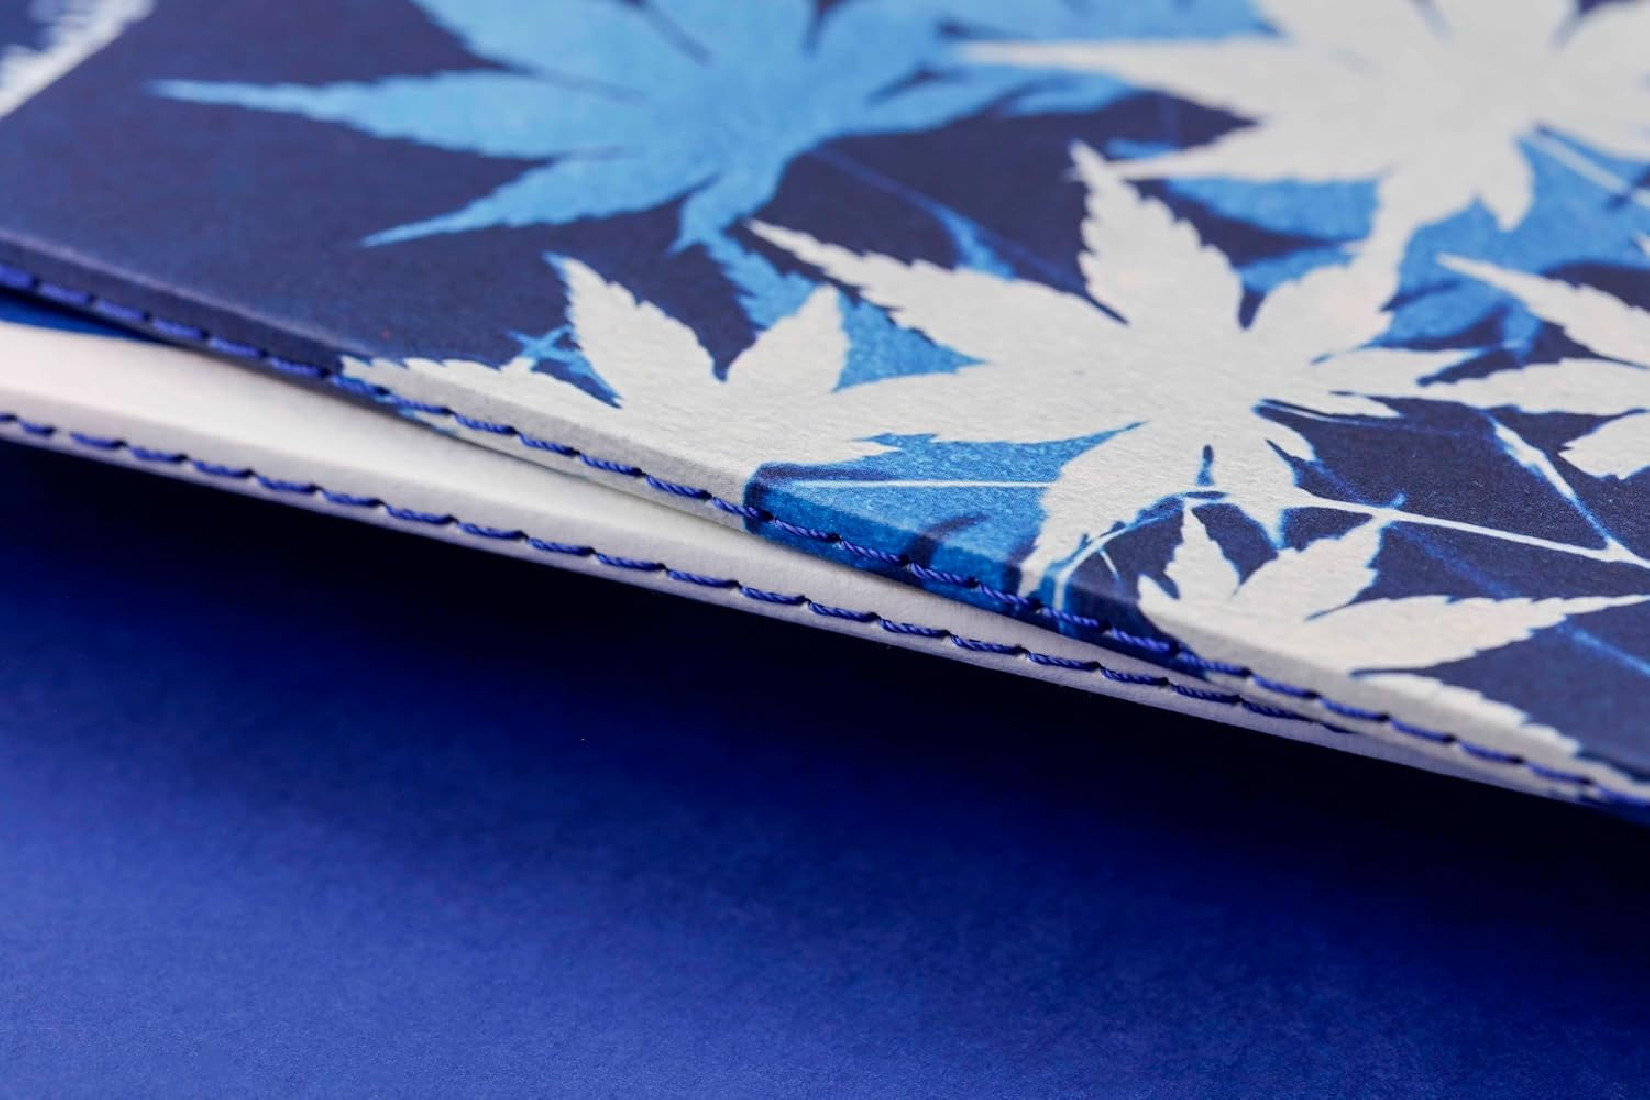 Clairefontaine Rhodia 83502C - A Sewn Notebook Floral / Cyanotype patterns - A5 14.8x21 cm 64 Pages Lined White paper 90g - Grain paper - Cyanotype Collection